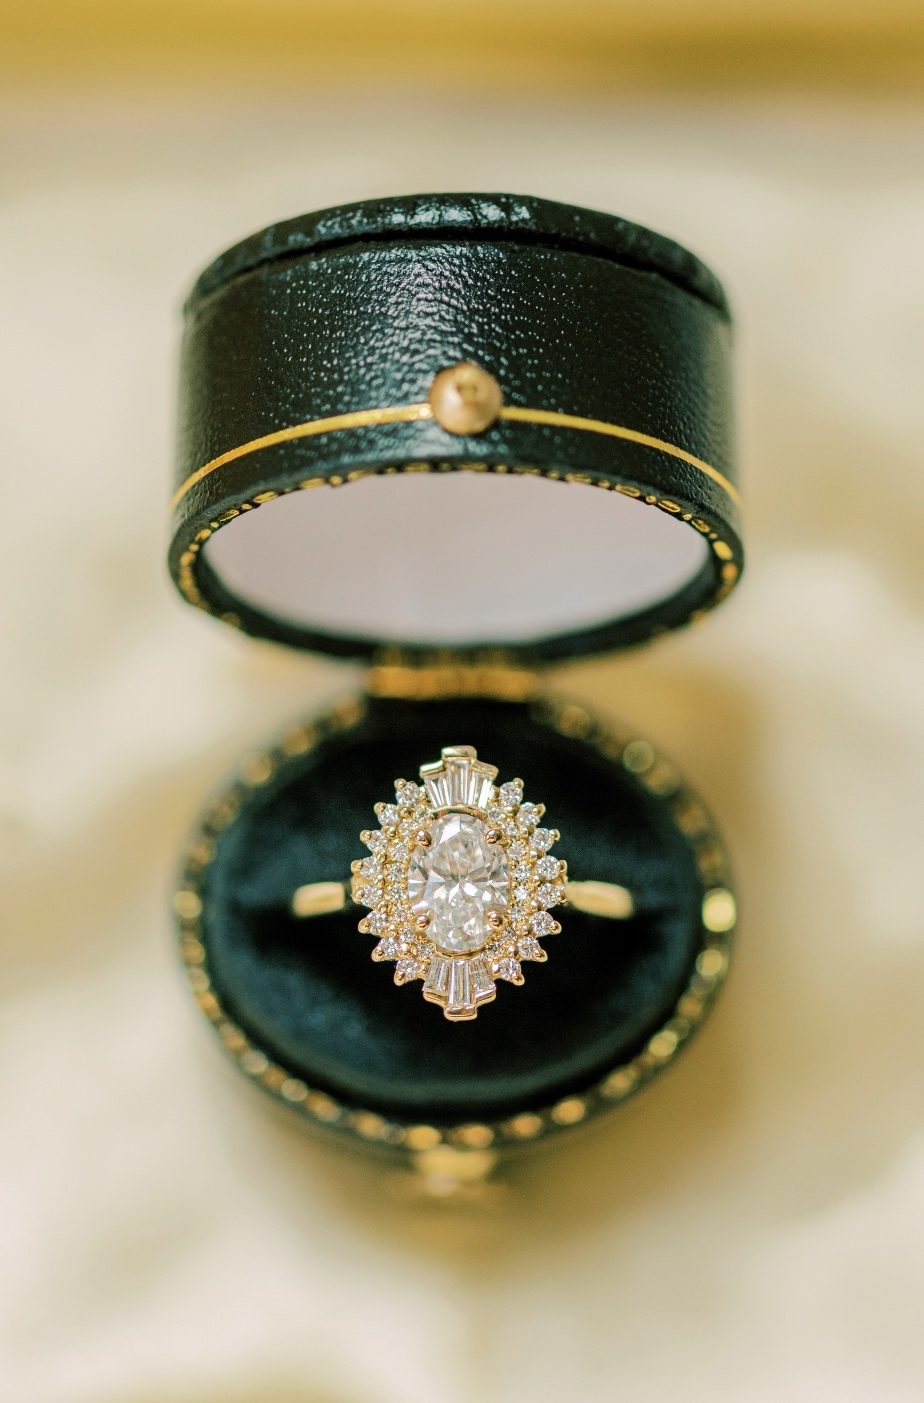 A close up detail shot of the beautiful wedding ring in a dark, decorative jewelry box